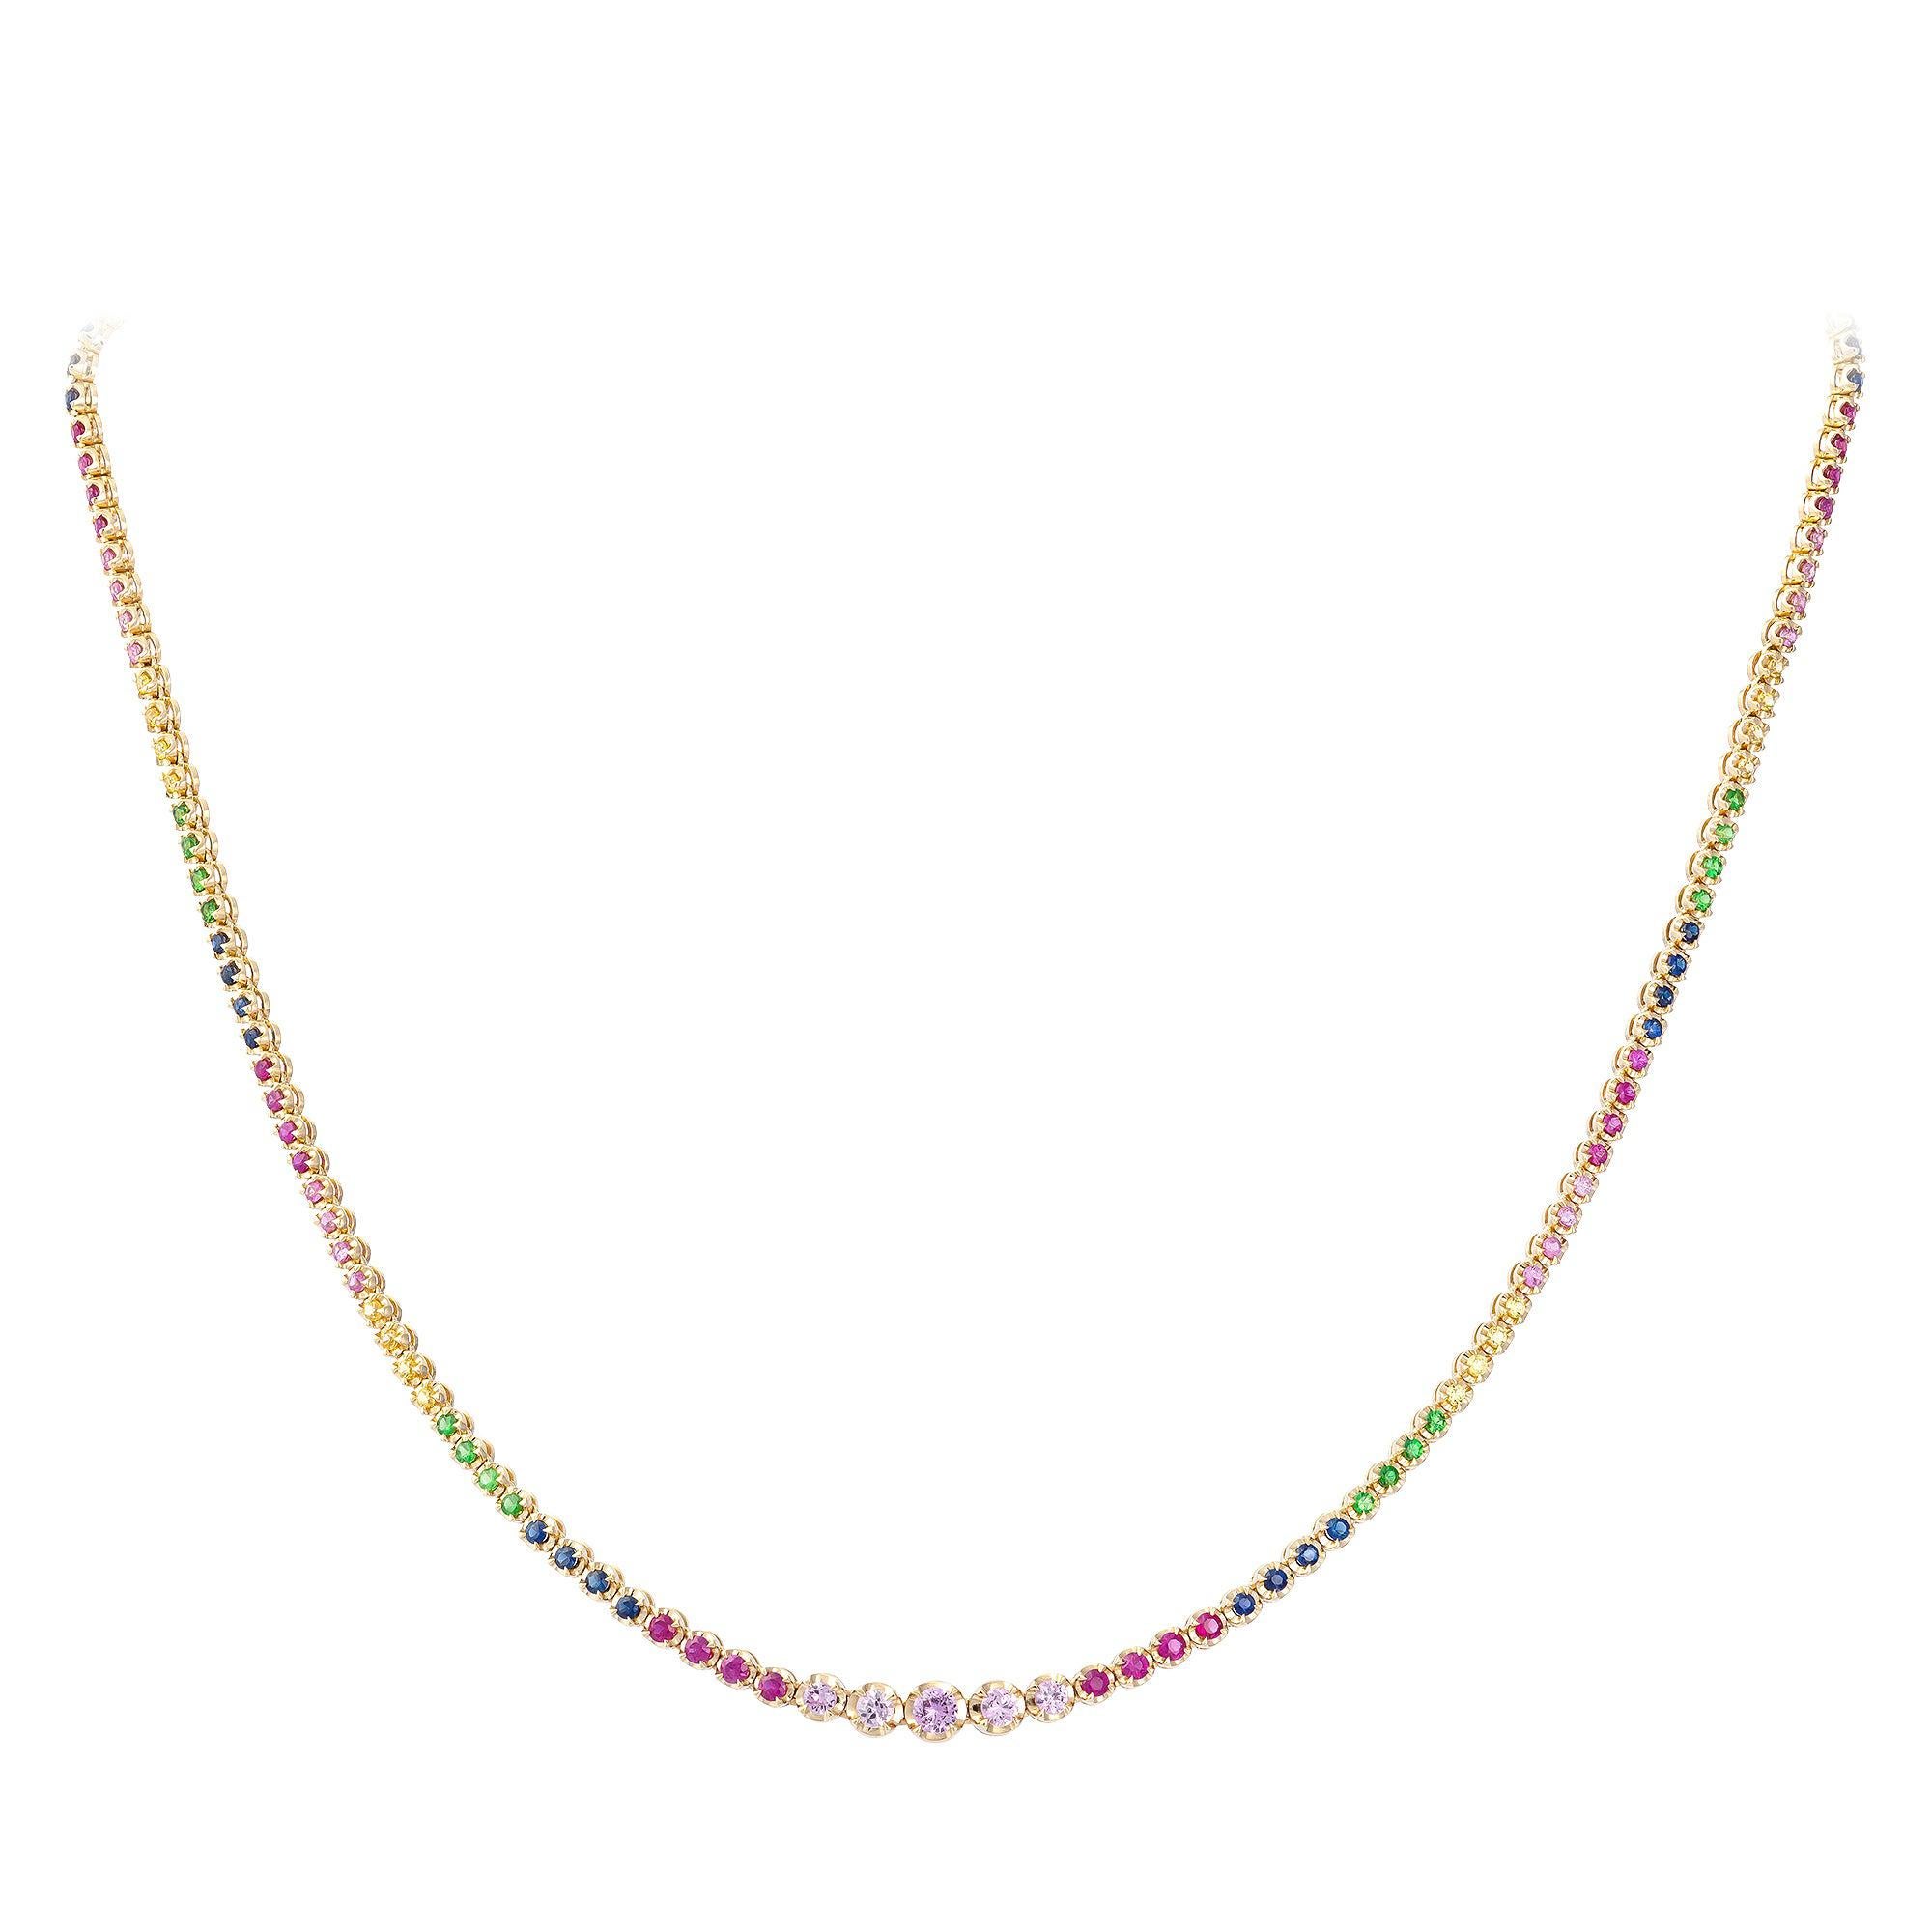 Fashionable Circle Multi Sapphire 18k White Gold Necklace Choker for Her For Sale